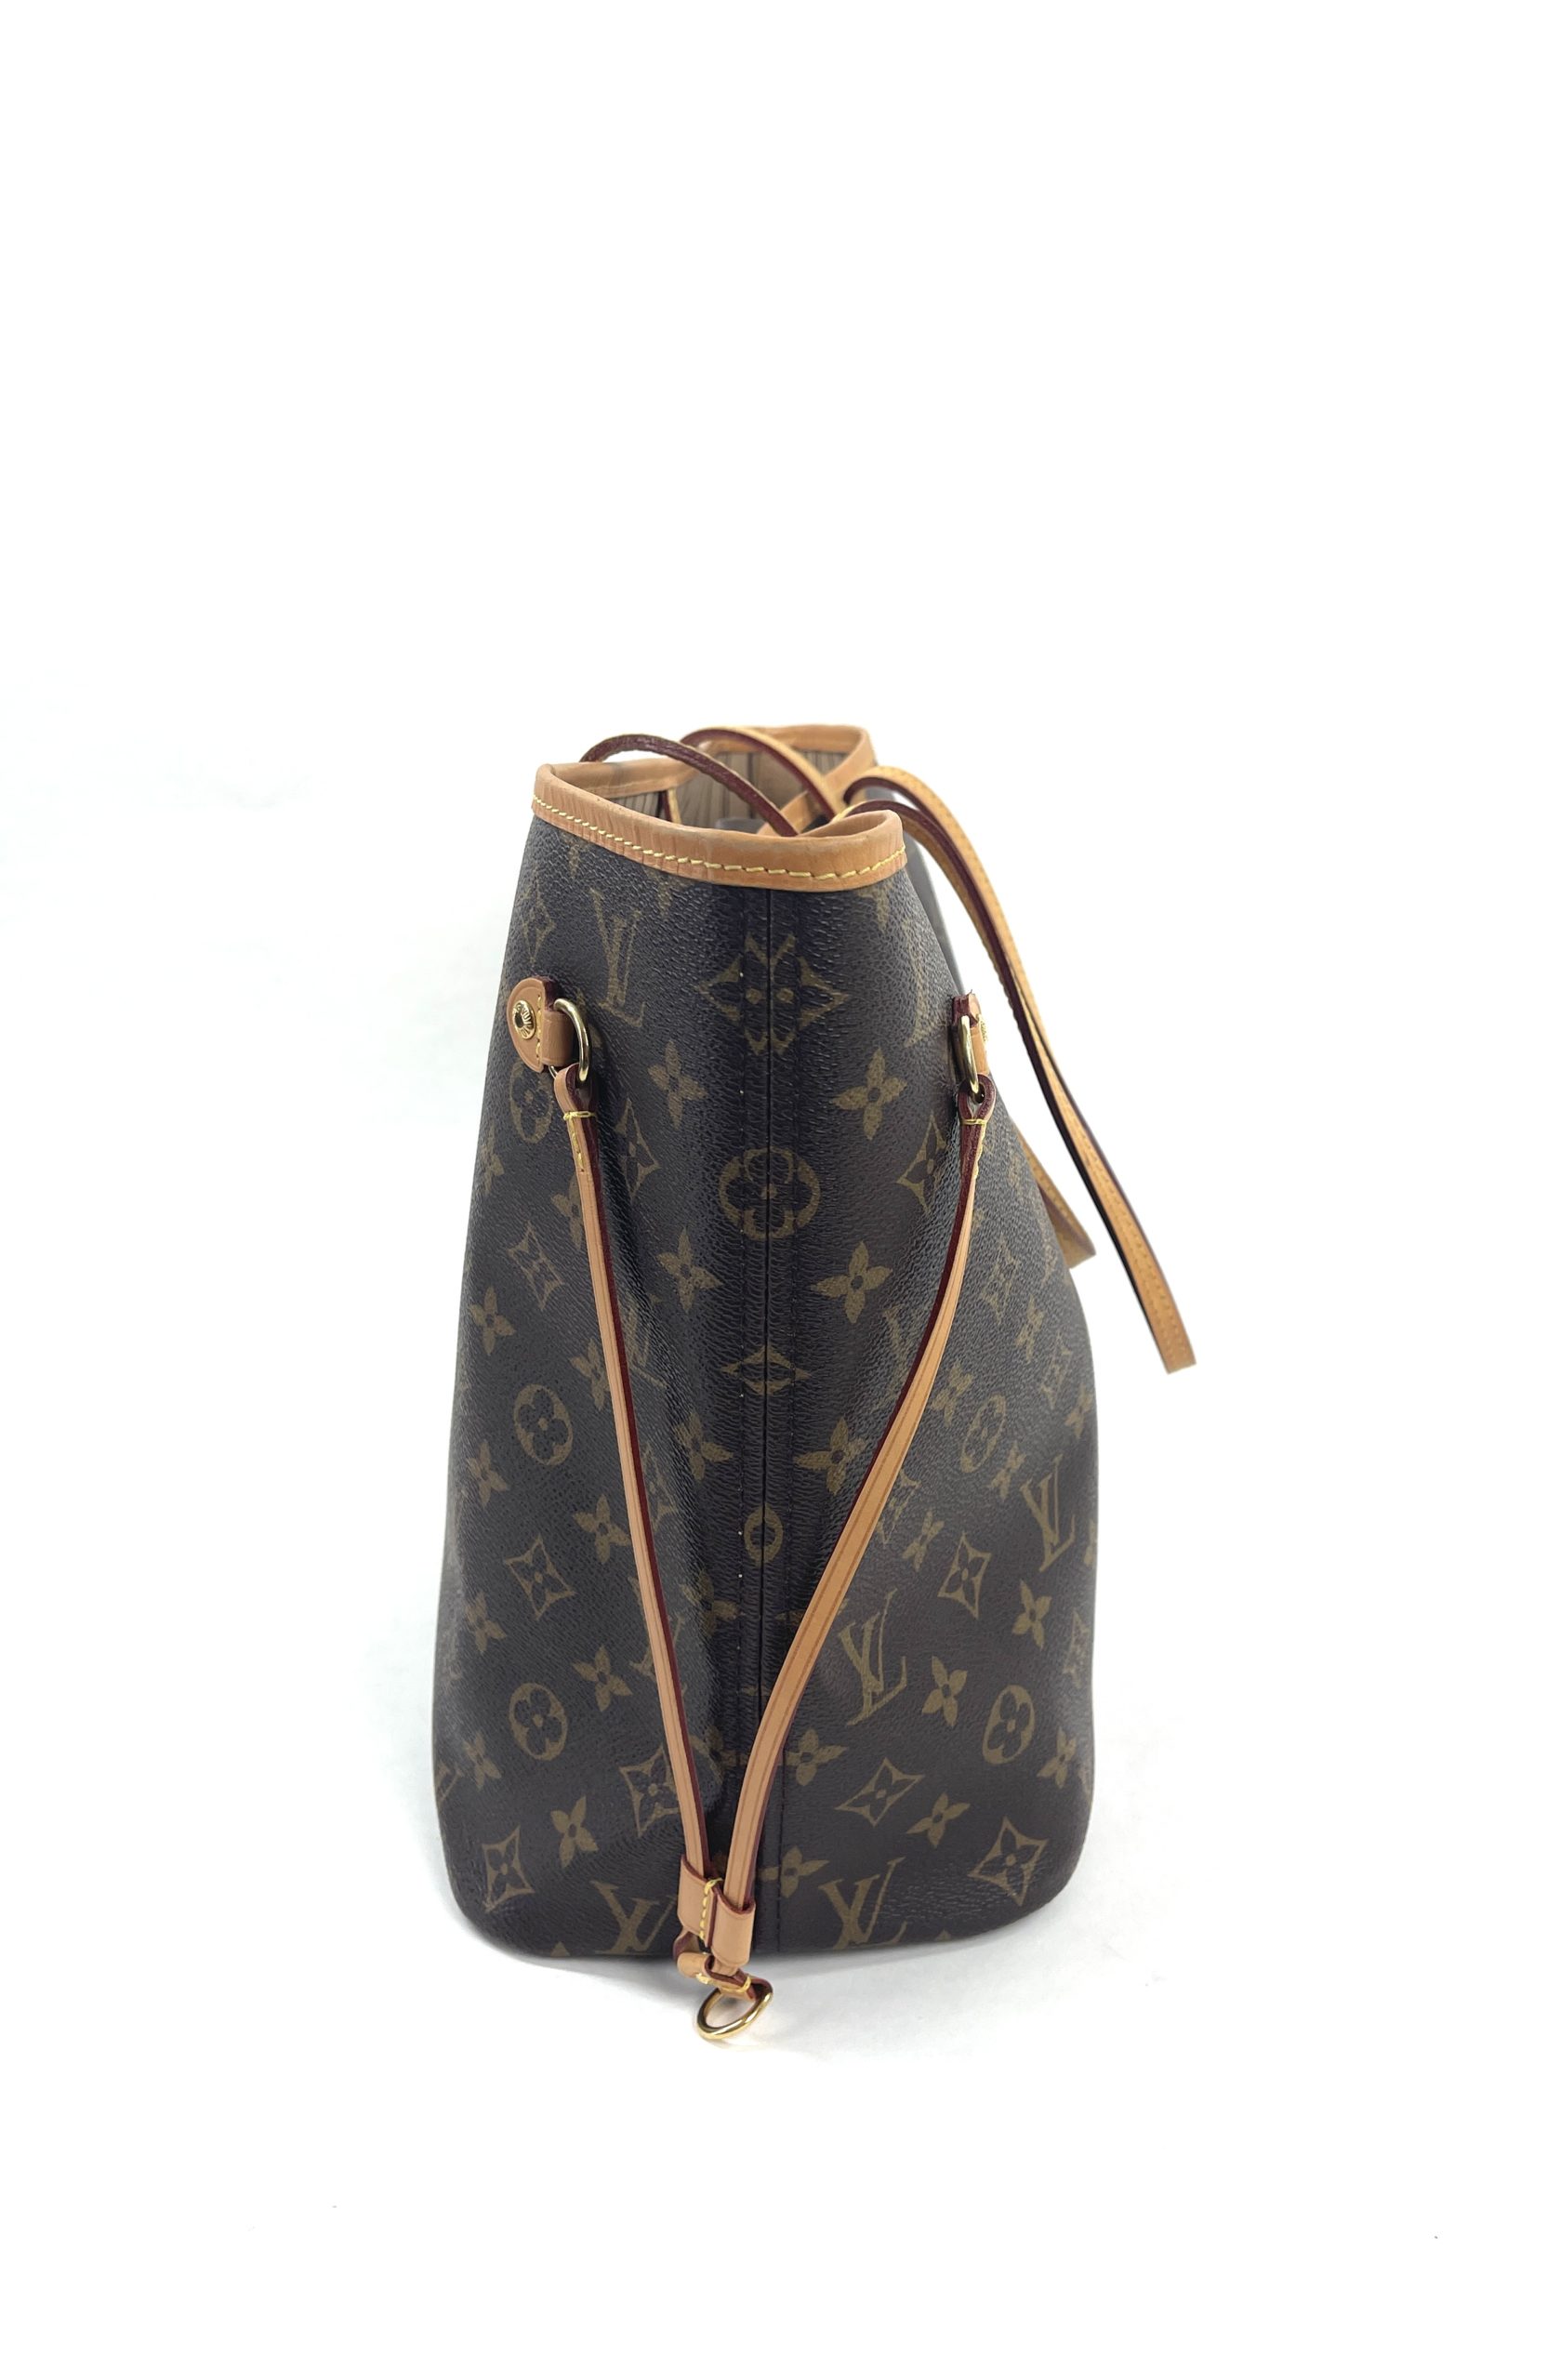 Louis Vuitton Fall For You Beige Clair Monogram Neverfull MM